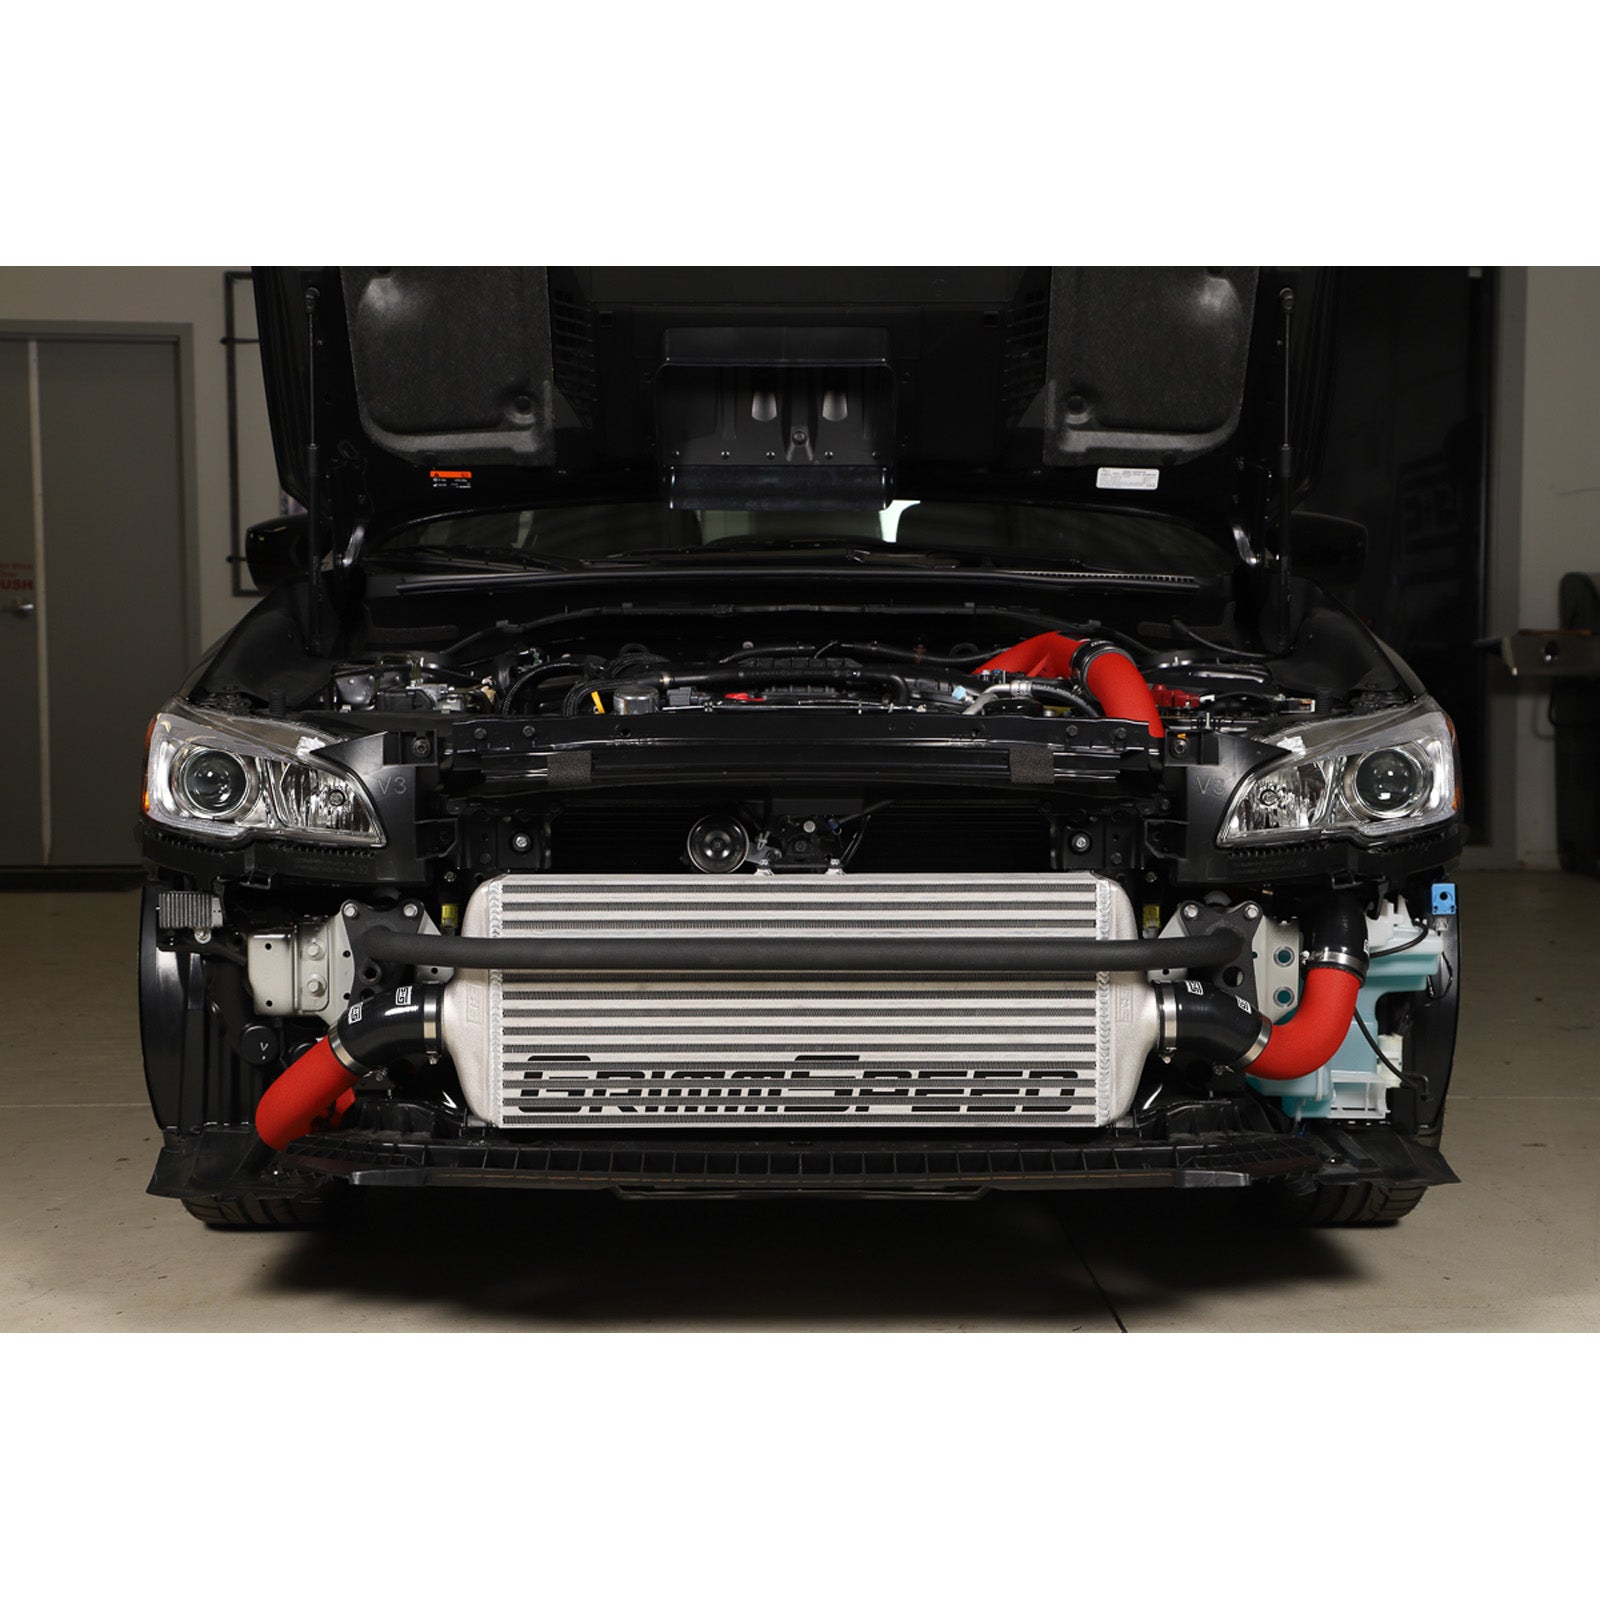 GrimmSpeed Front Mount Intercooler Kit - Raw Core with Red Piping - 2015-21 Subaru WRX